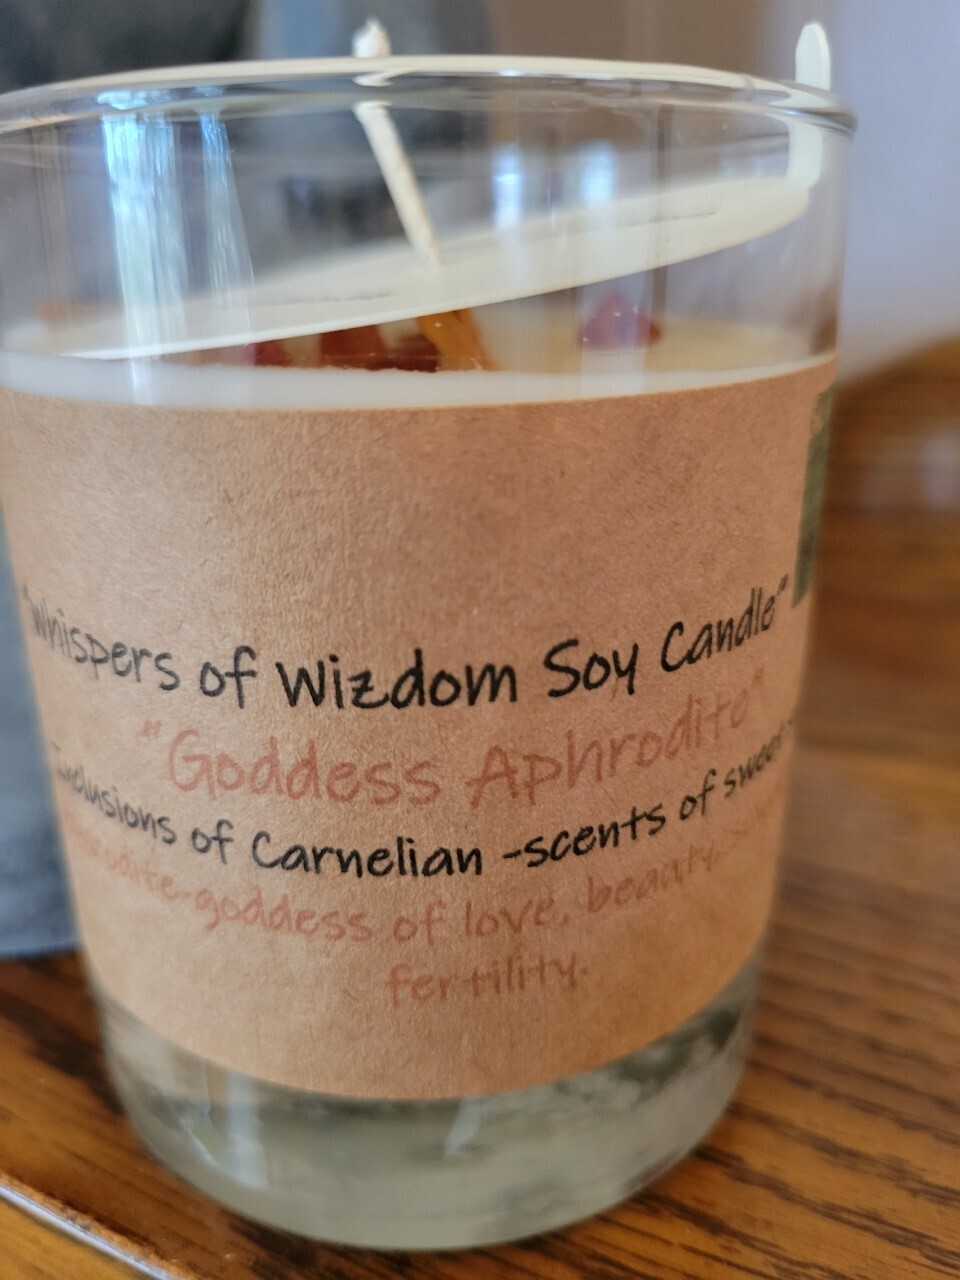 Judy's Soy Candle - Goddess Aphrodite